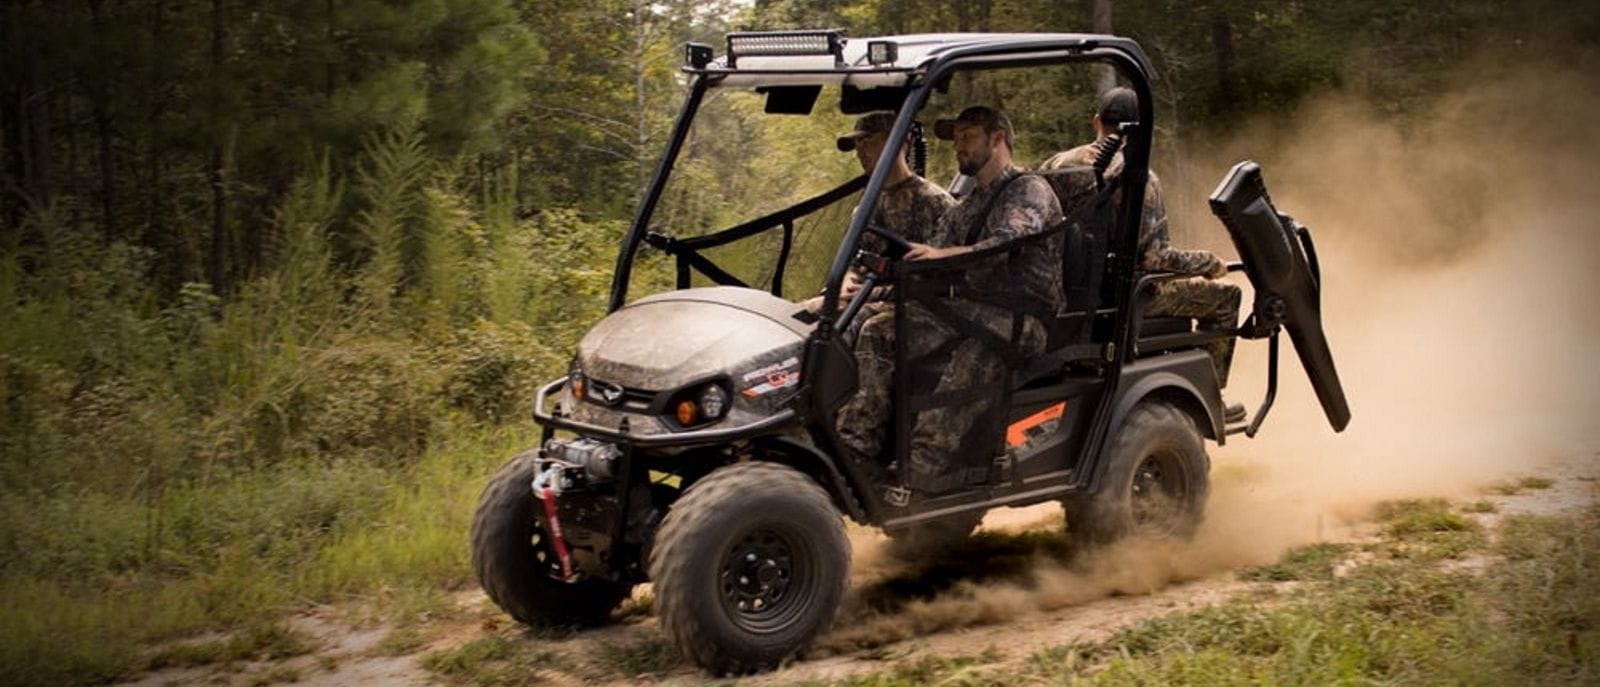 Augusta Golf & Utility Cars are the master distributor for Textron Offroad products